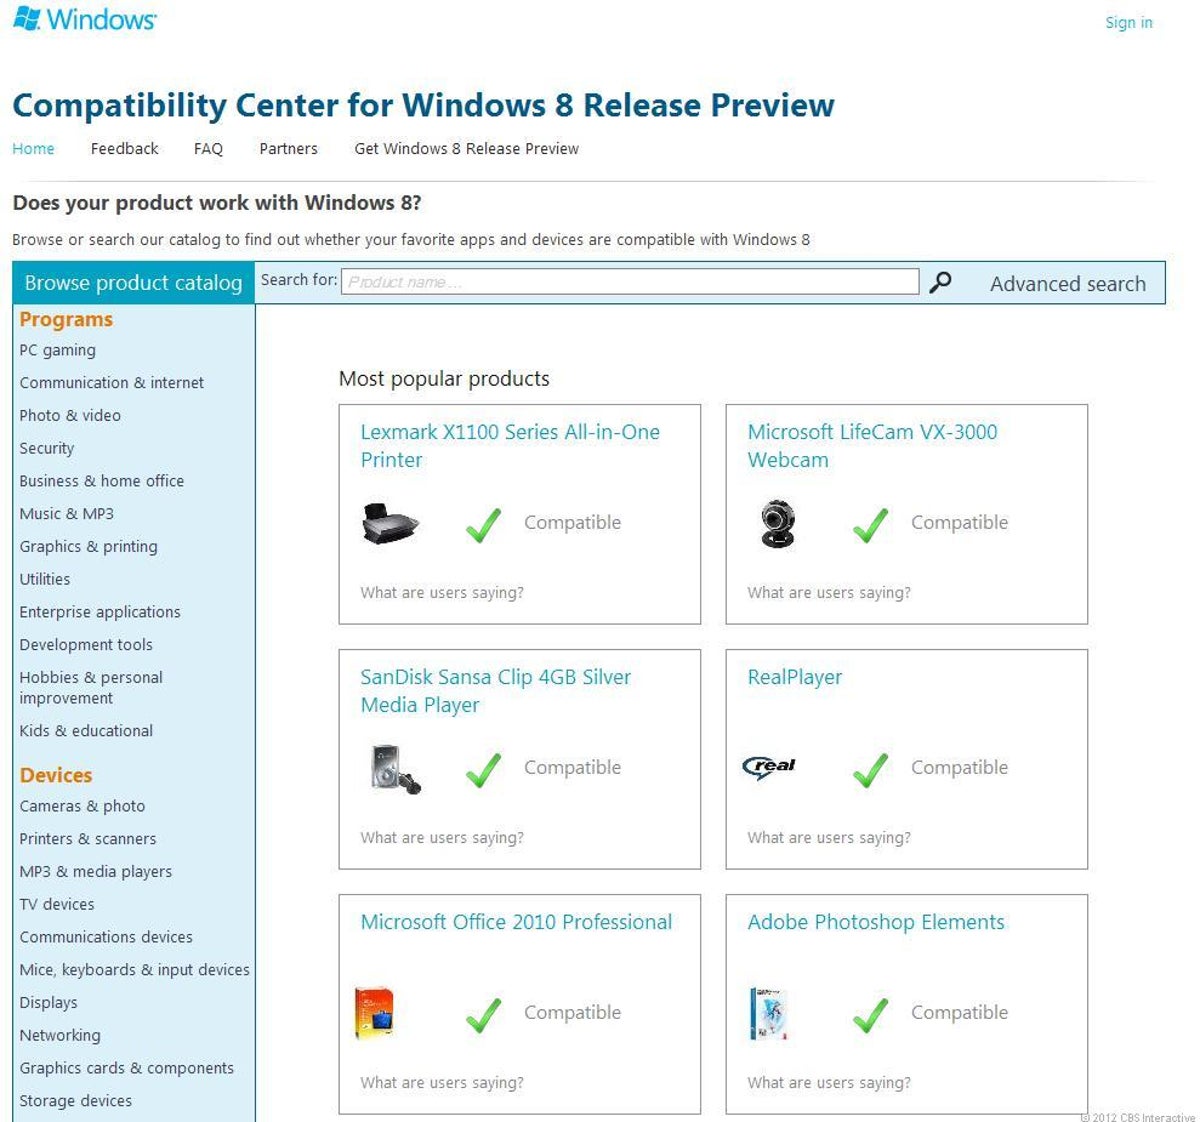 Microsoft's Windows 8 Compatibility Center helps verify which hardware and software will work in the new OS.